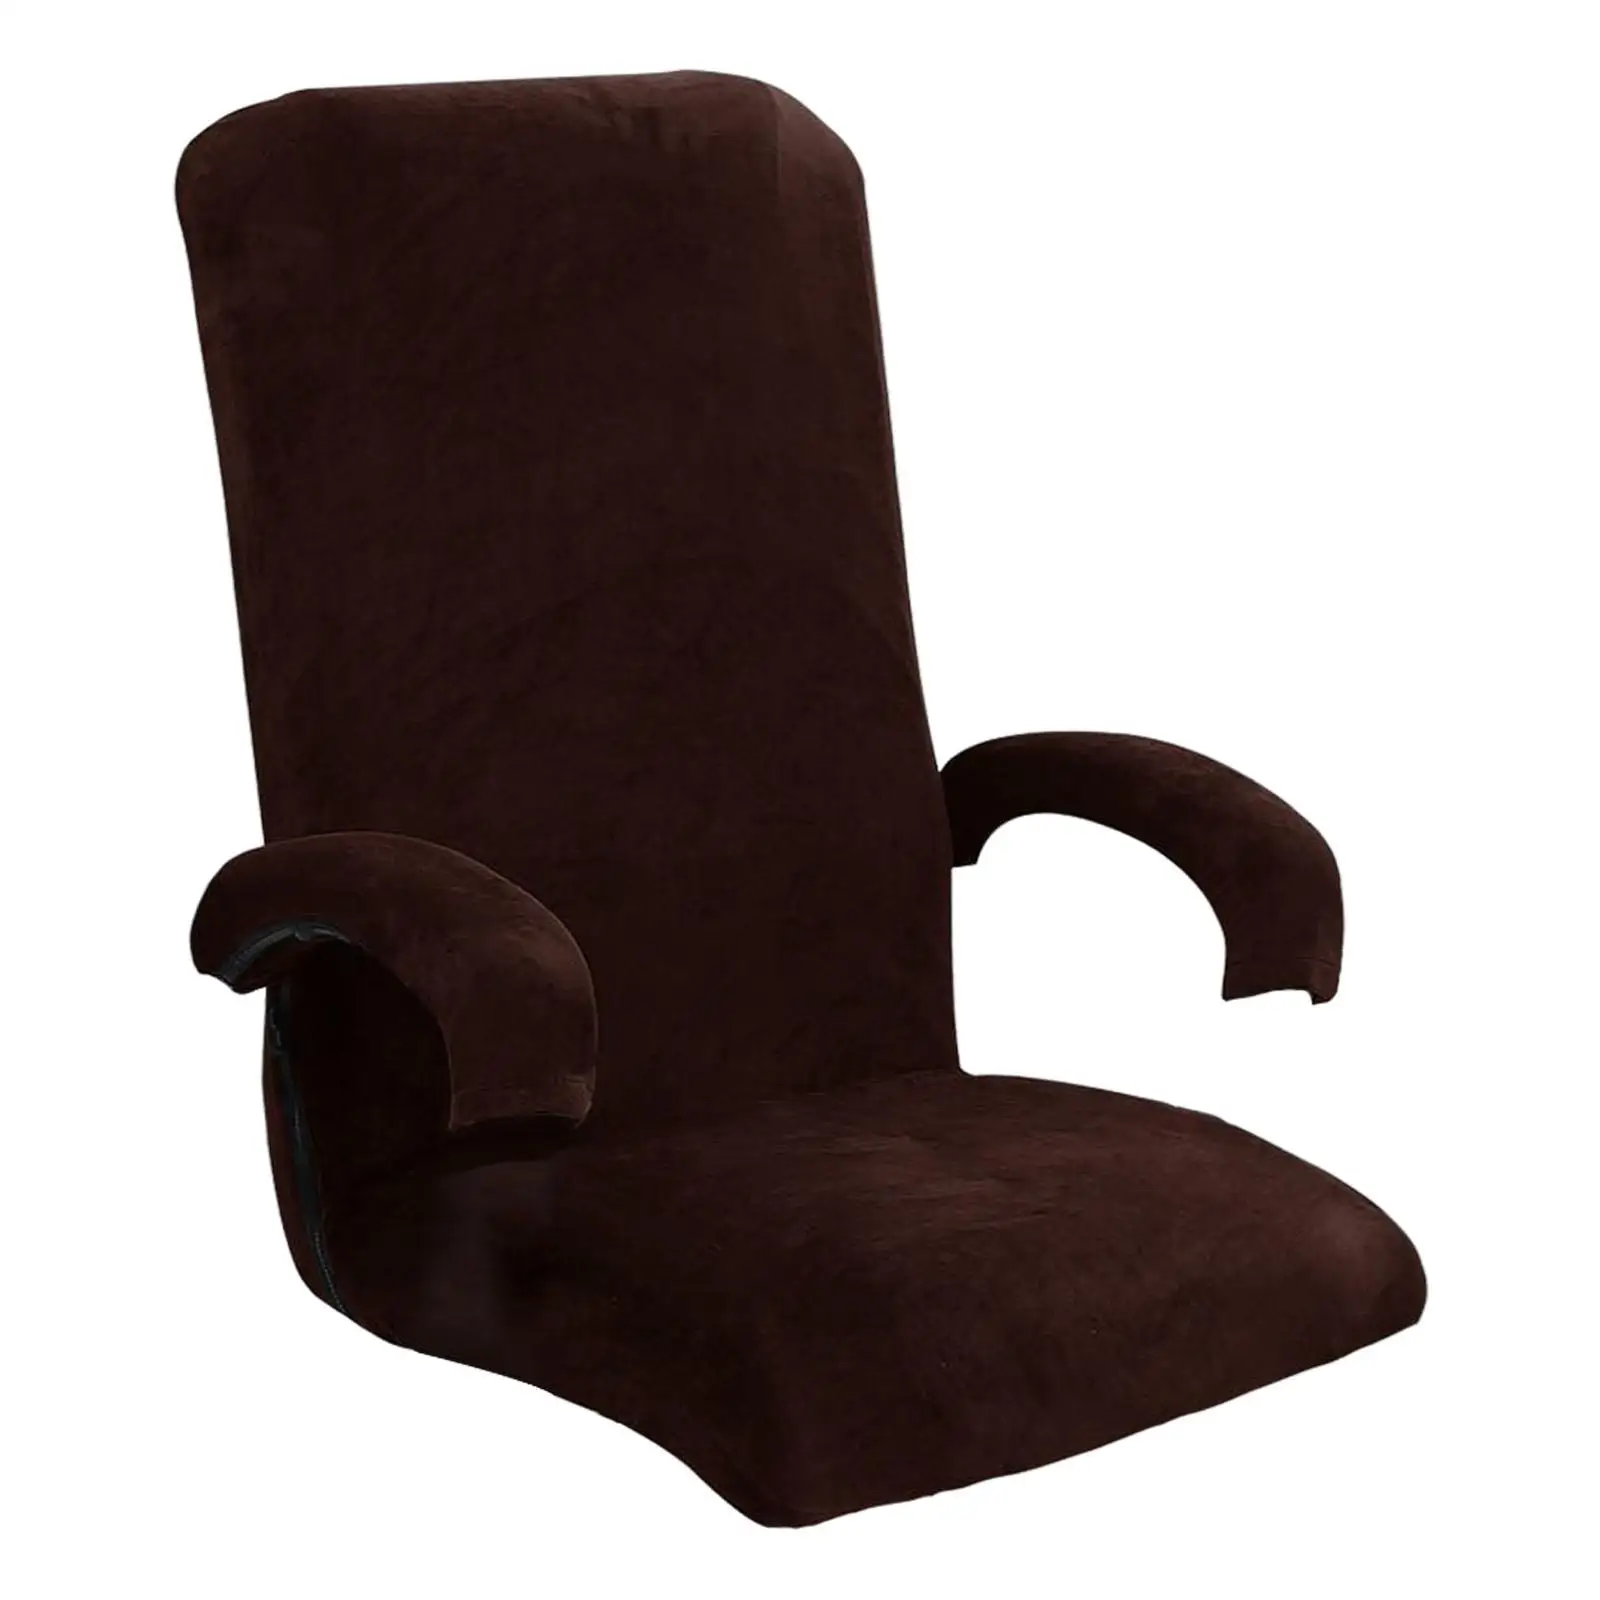 Rotating Chair Cover Slipcover Anti Wrinkle Universal Computer Chair Cover for Game Chair